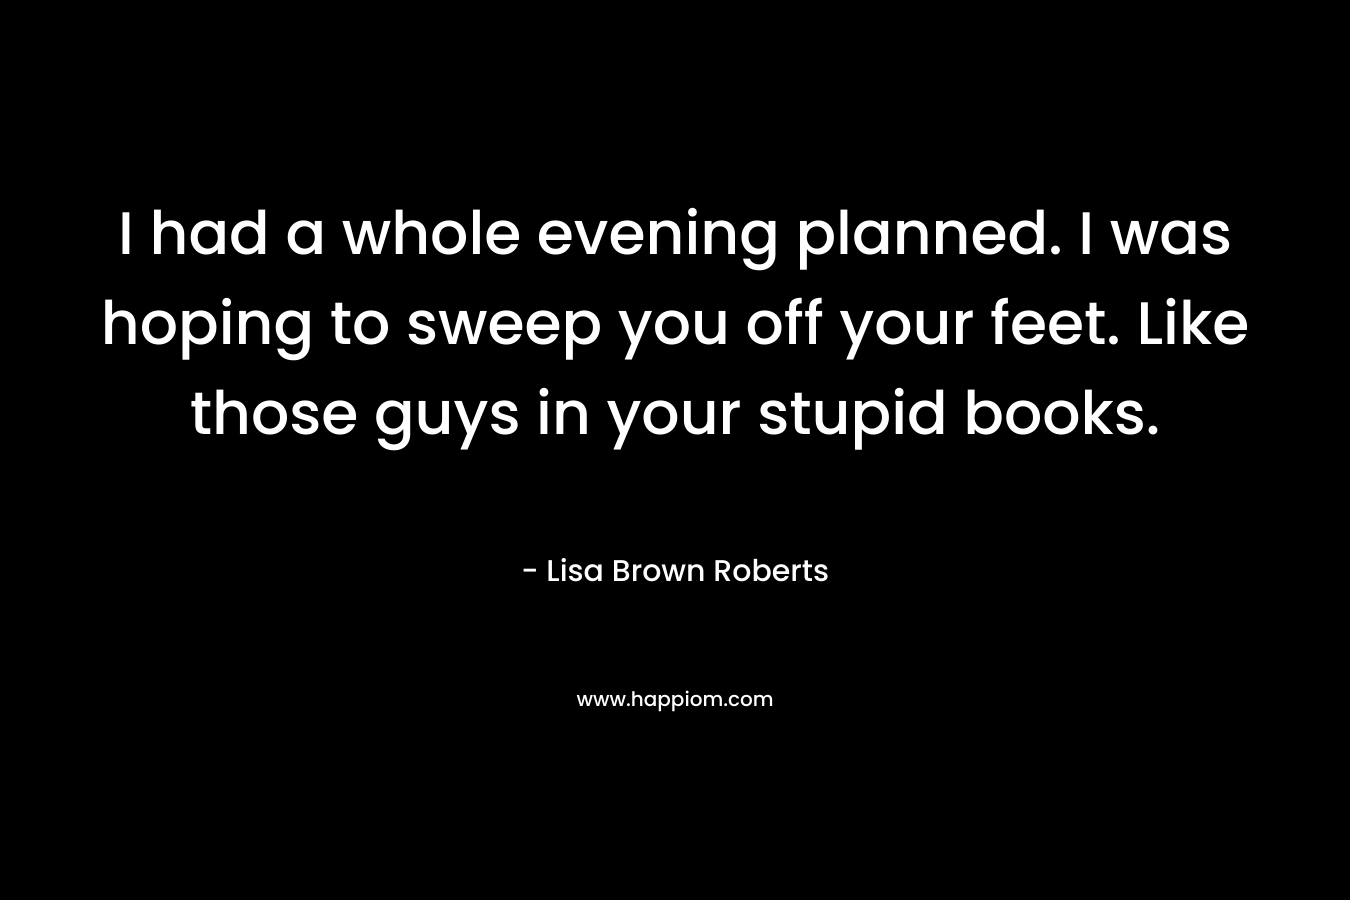 I had a whole evening planned. I was hoping to sweep you off your feet. Like those guys in your stupid books. – Lisa Brown Roberts